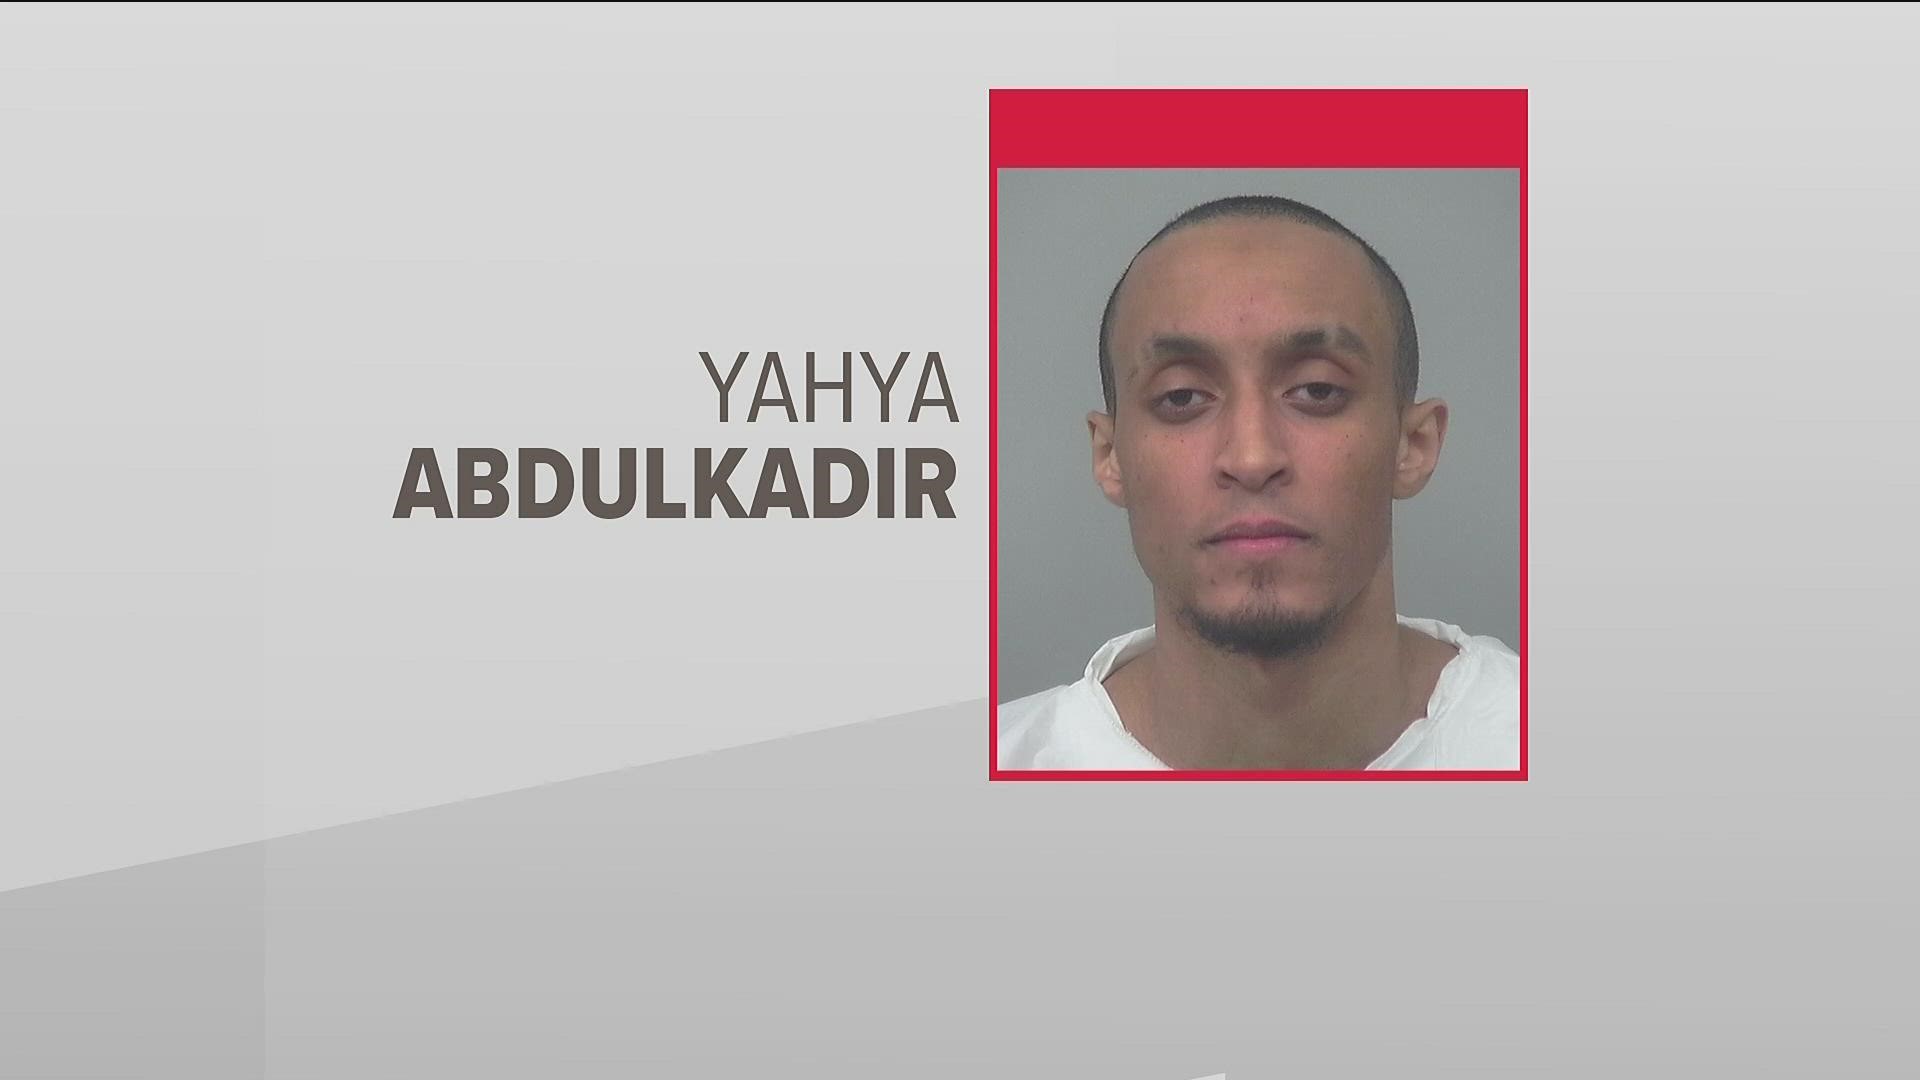 The grand jury indicted 22-year-old Yahya Abdulkadir on several charges after he allegedly in gunning down Gwinnett Corrections Officer Scott Riner.